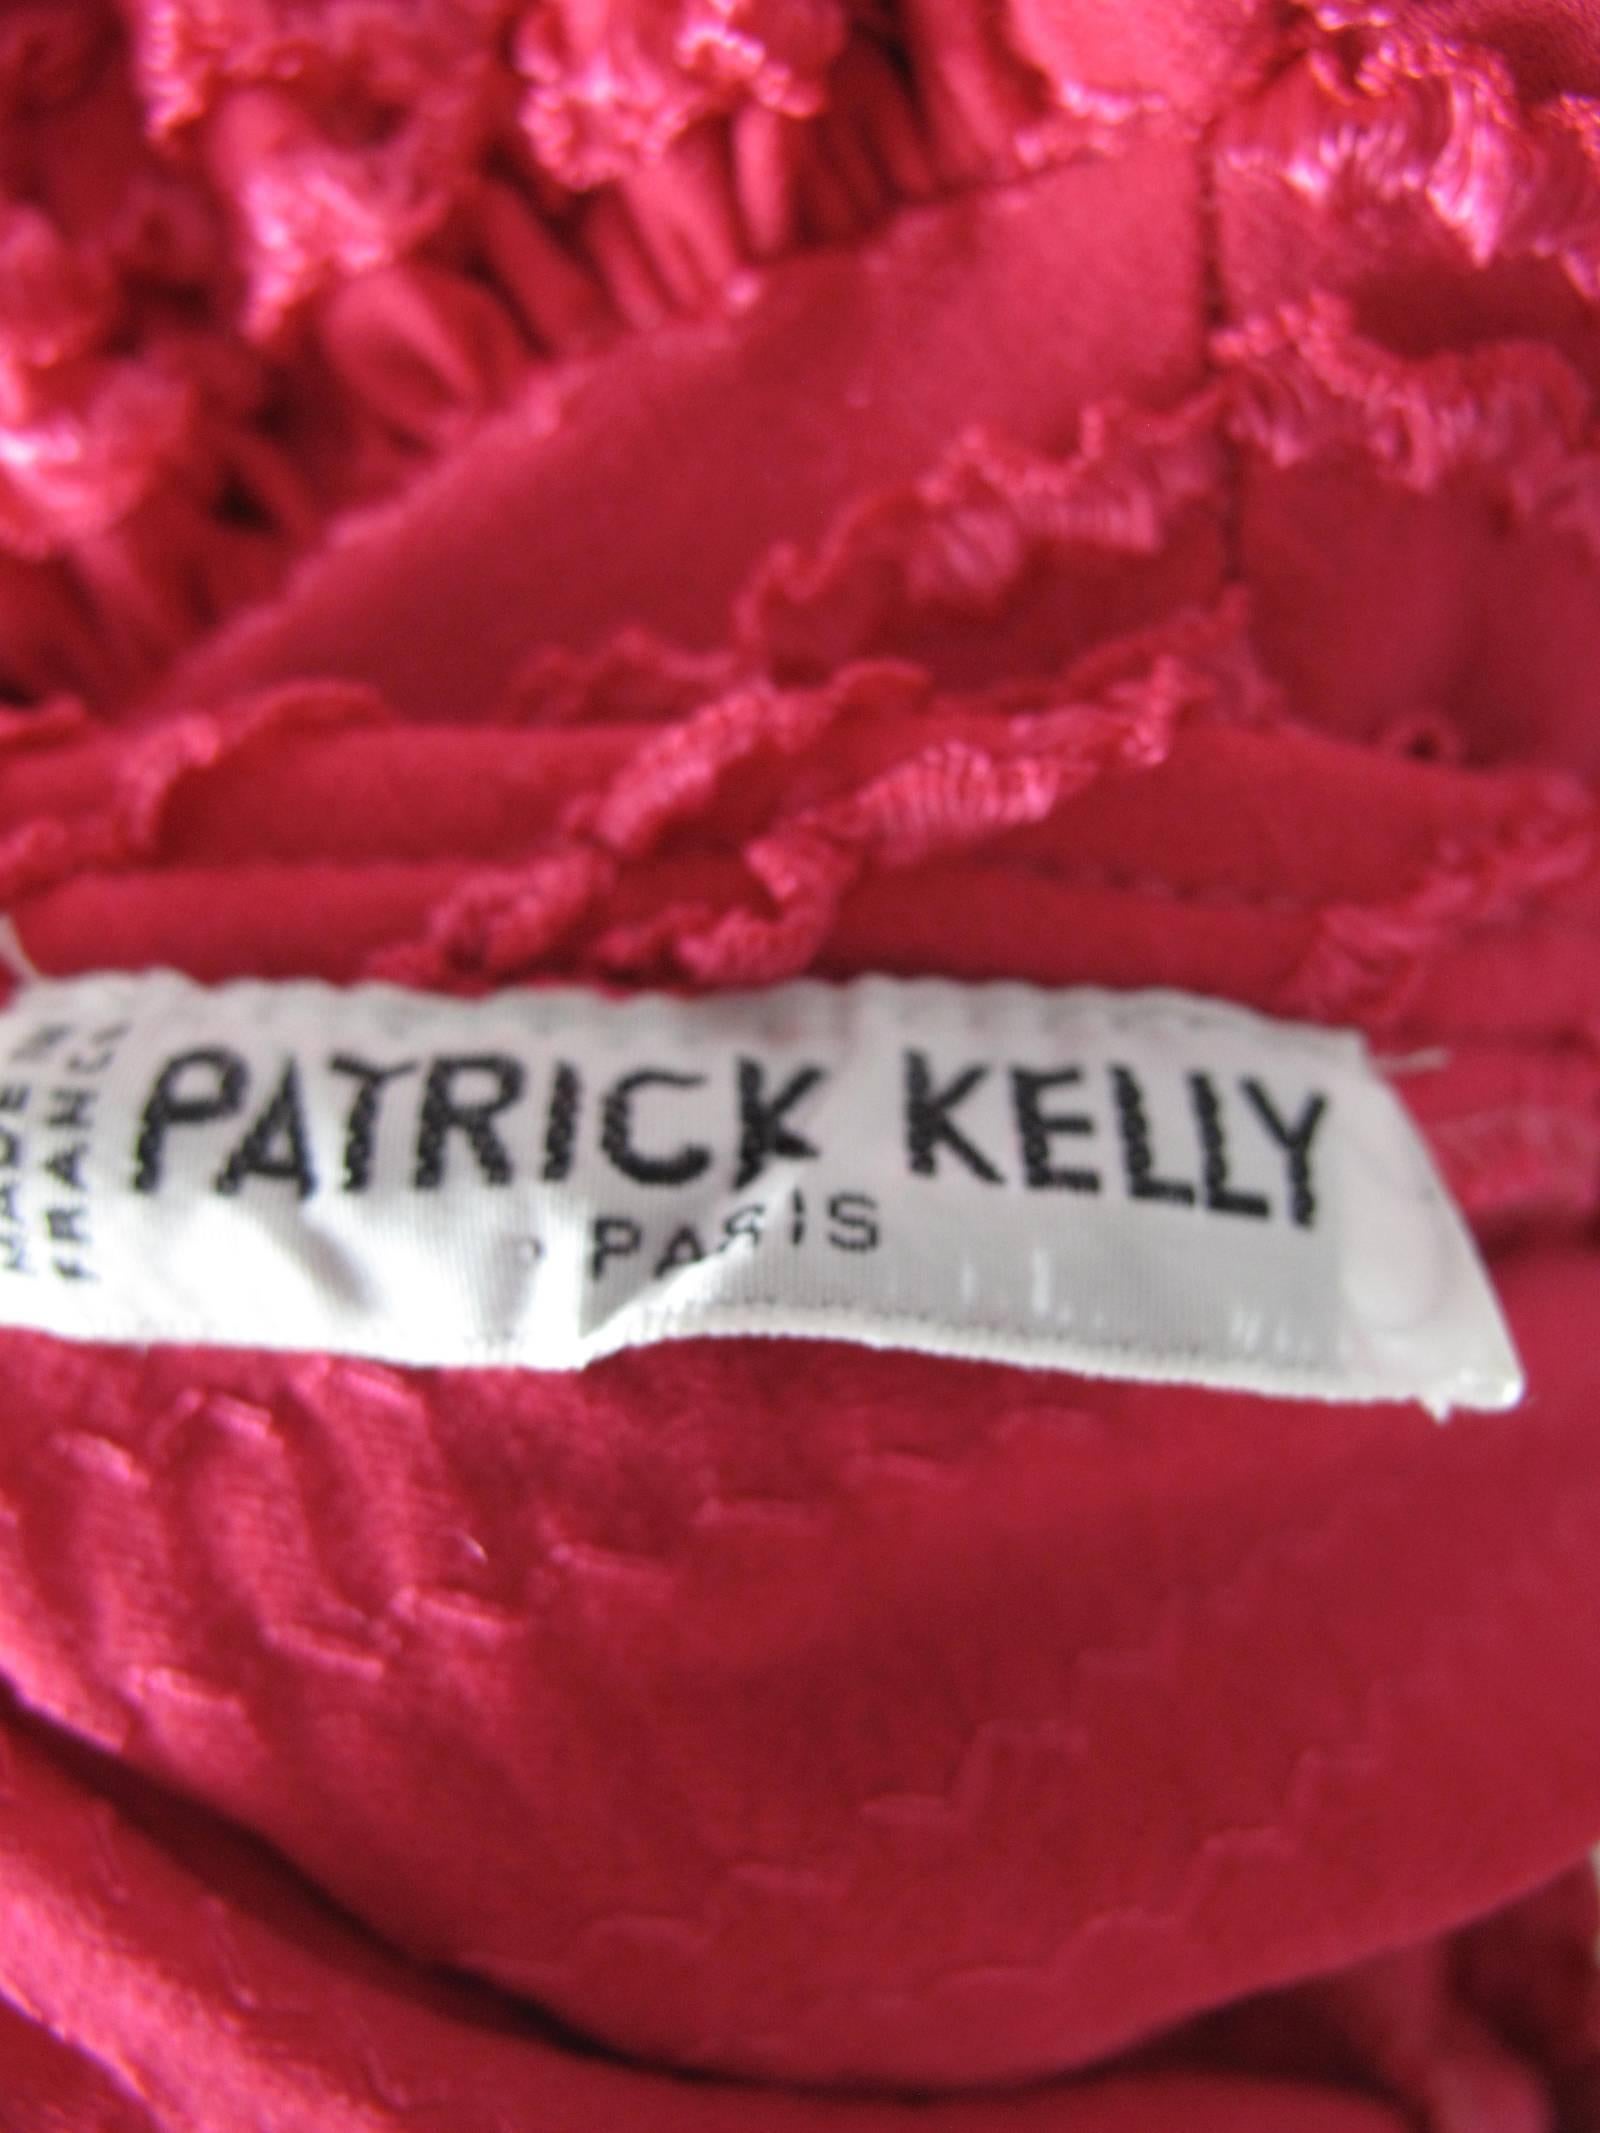 1986 hot pink Patrick Kelly dress with dropped waist and ruffles.  Fabric has elastic, can be worn off shoulders.  polamide/elastic fabric. Condition: Excellent. Size Medium 
Made in France

41" bust, 25" waist, 34" hips, 39